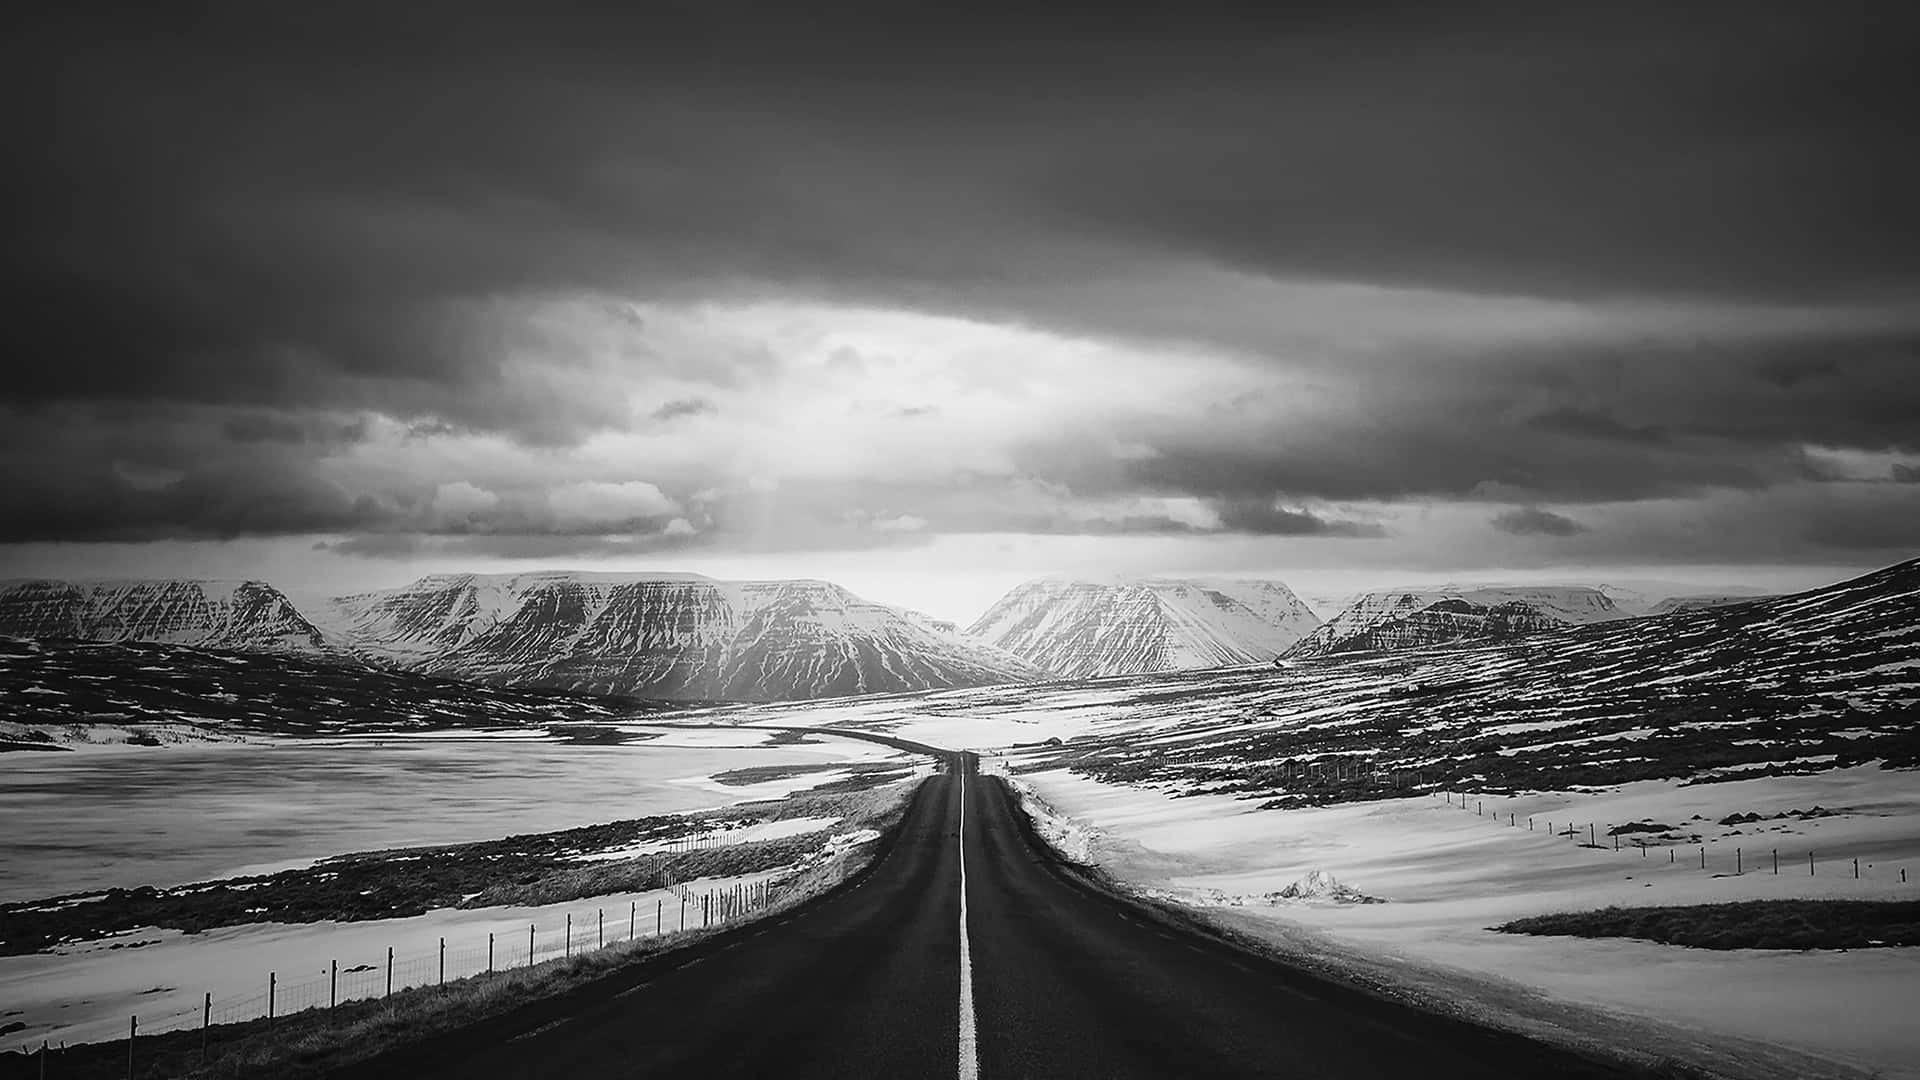 A Black And White Photo Of A Road In The Snow